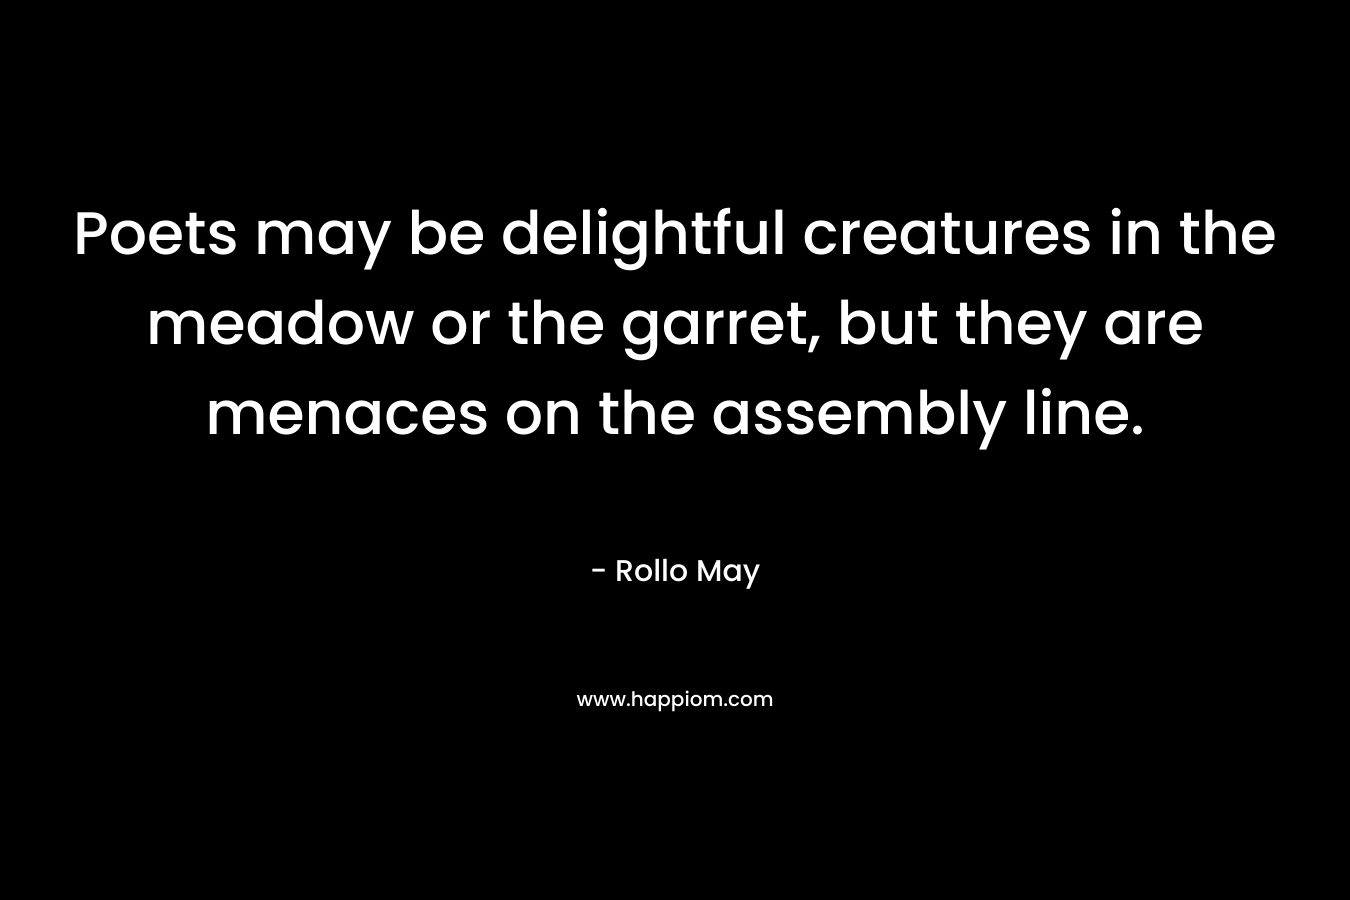 Poets may be delightful creatures in the meadow or the garret, but they are menaces on the assembly line. – Rollo May